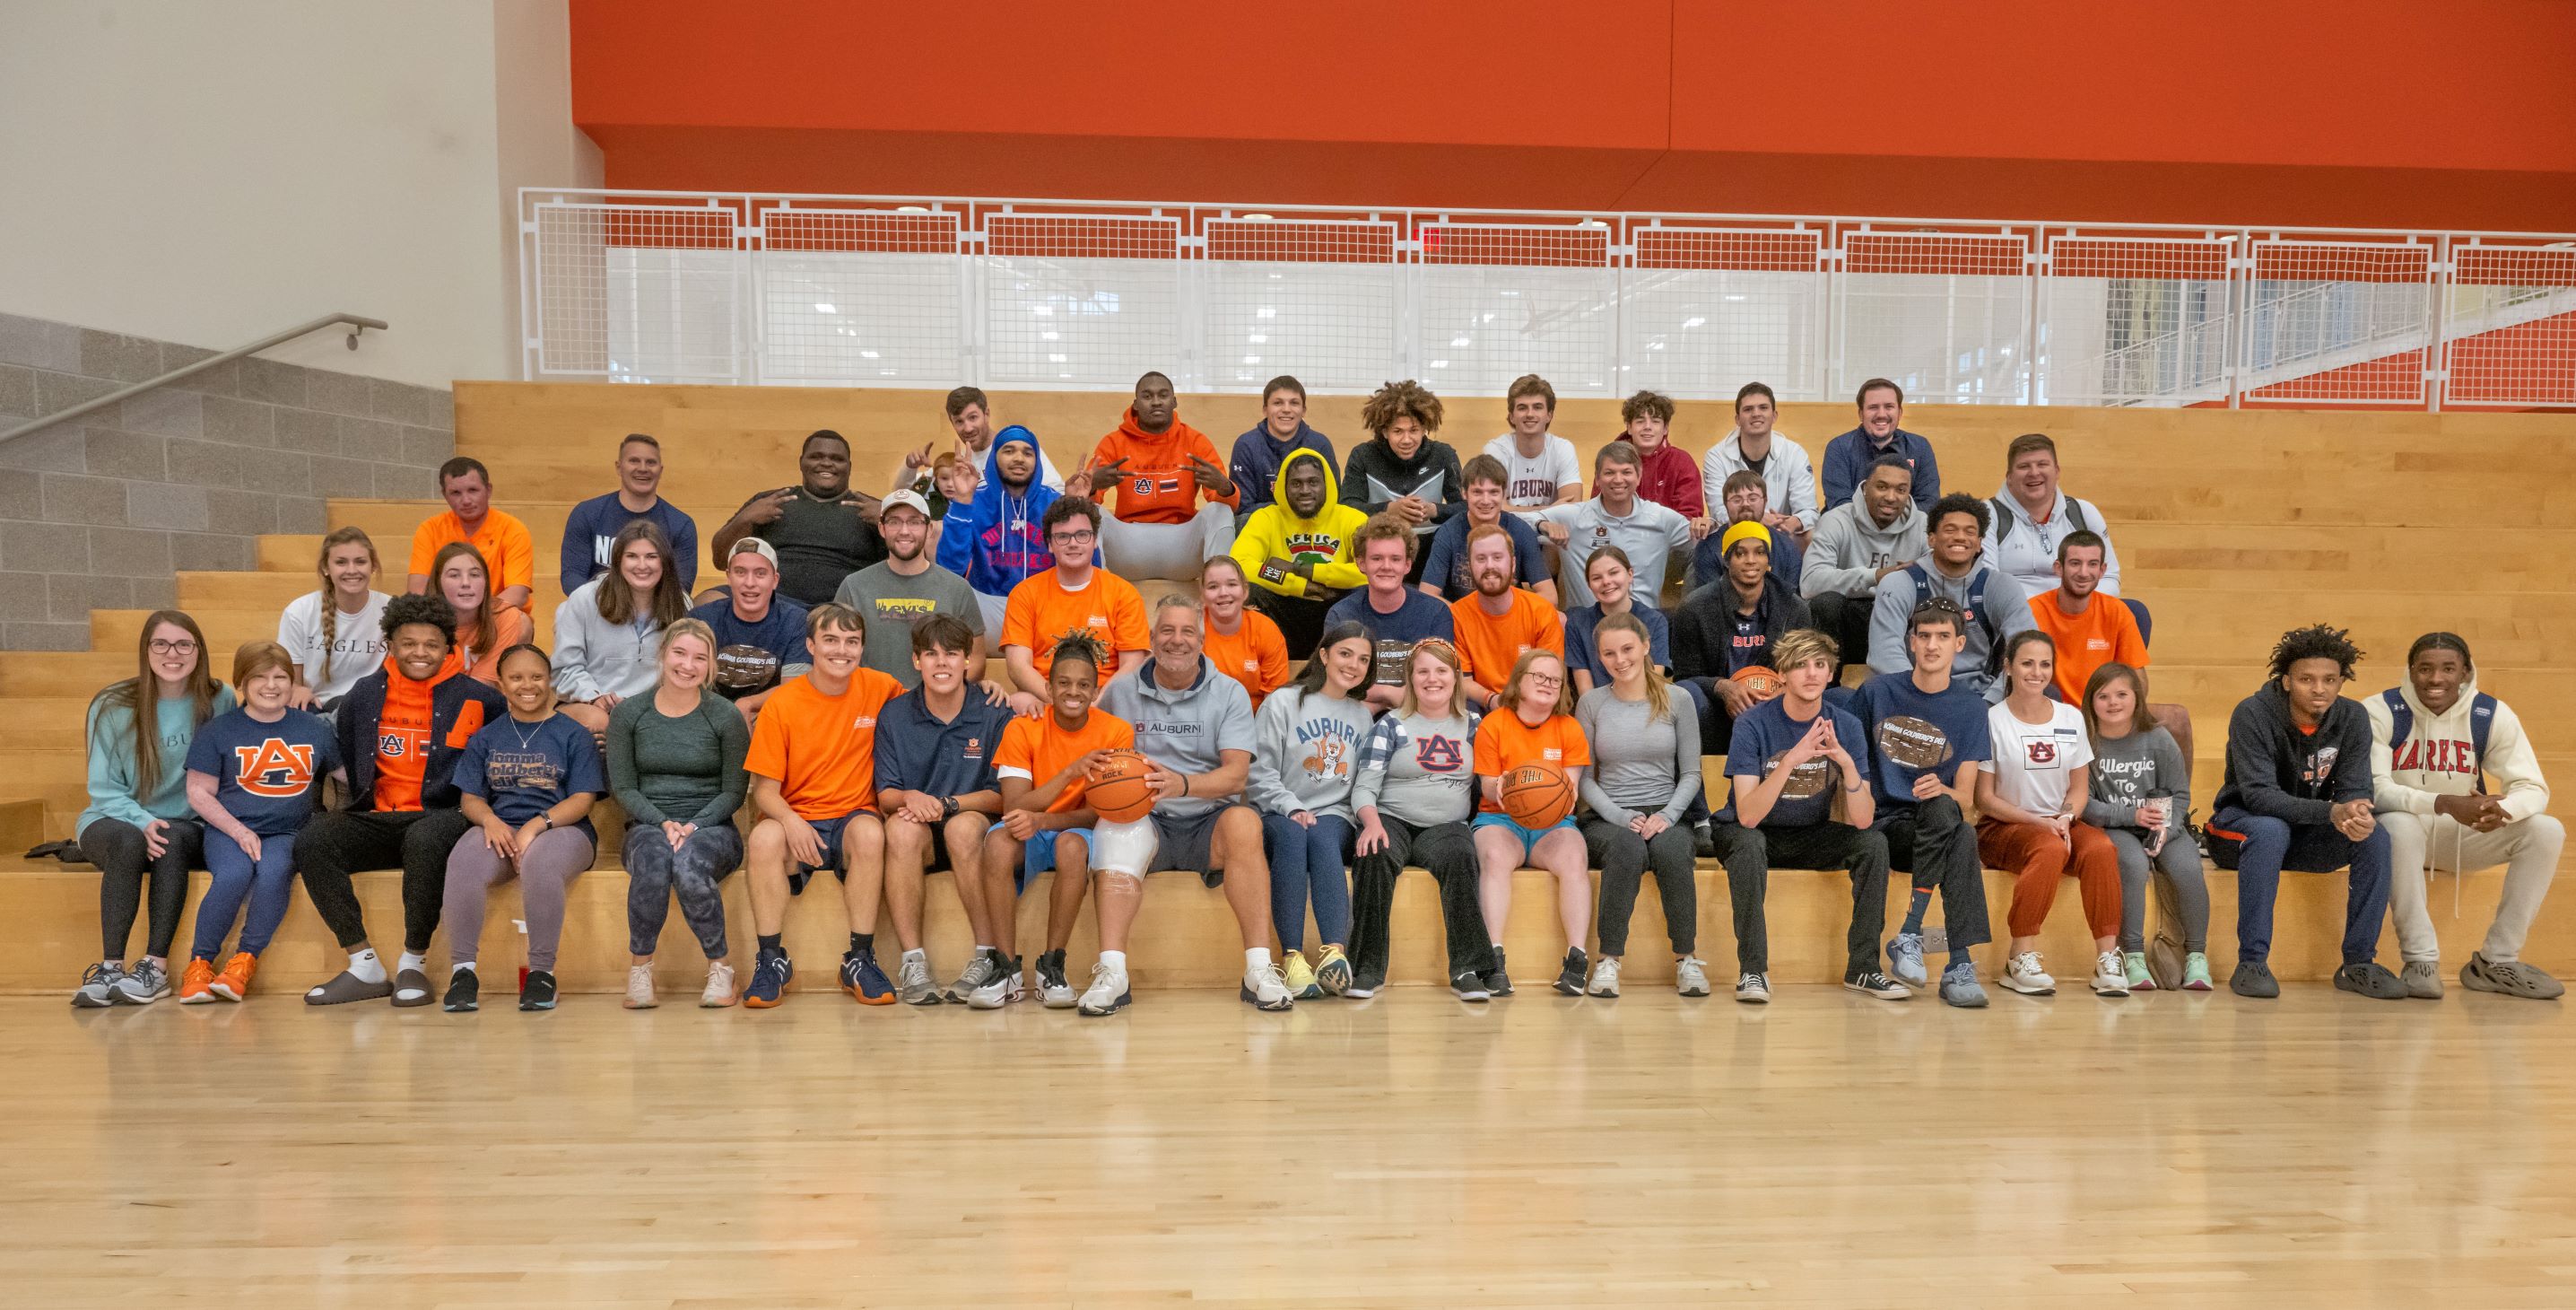 EAGLES students with Auburn men's basketball team members